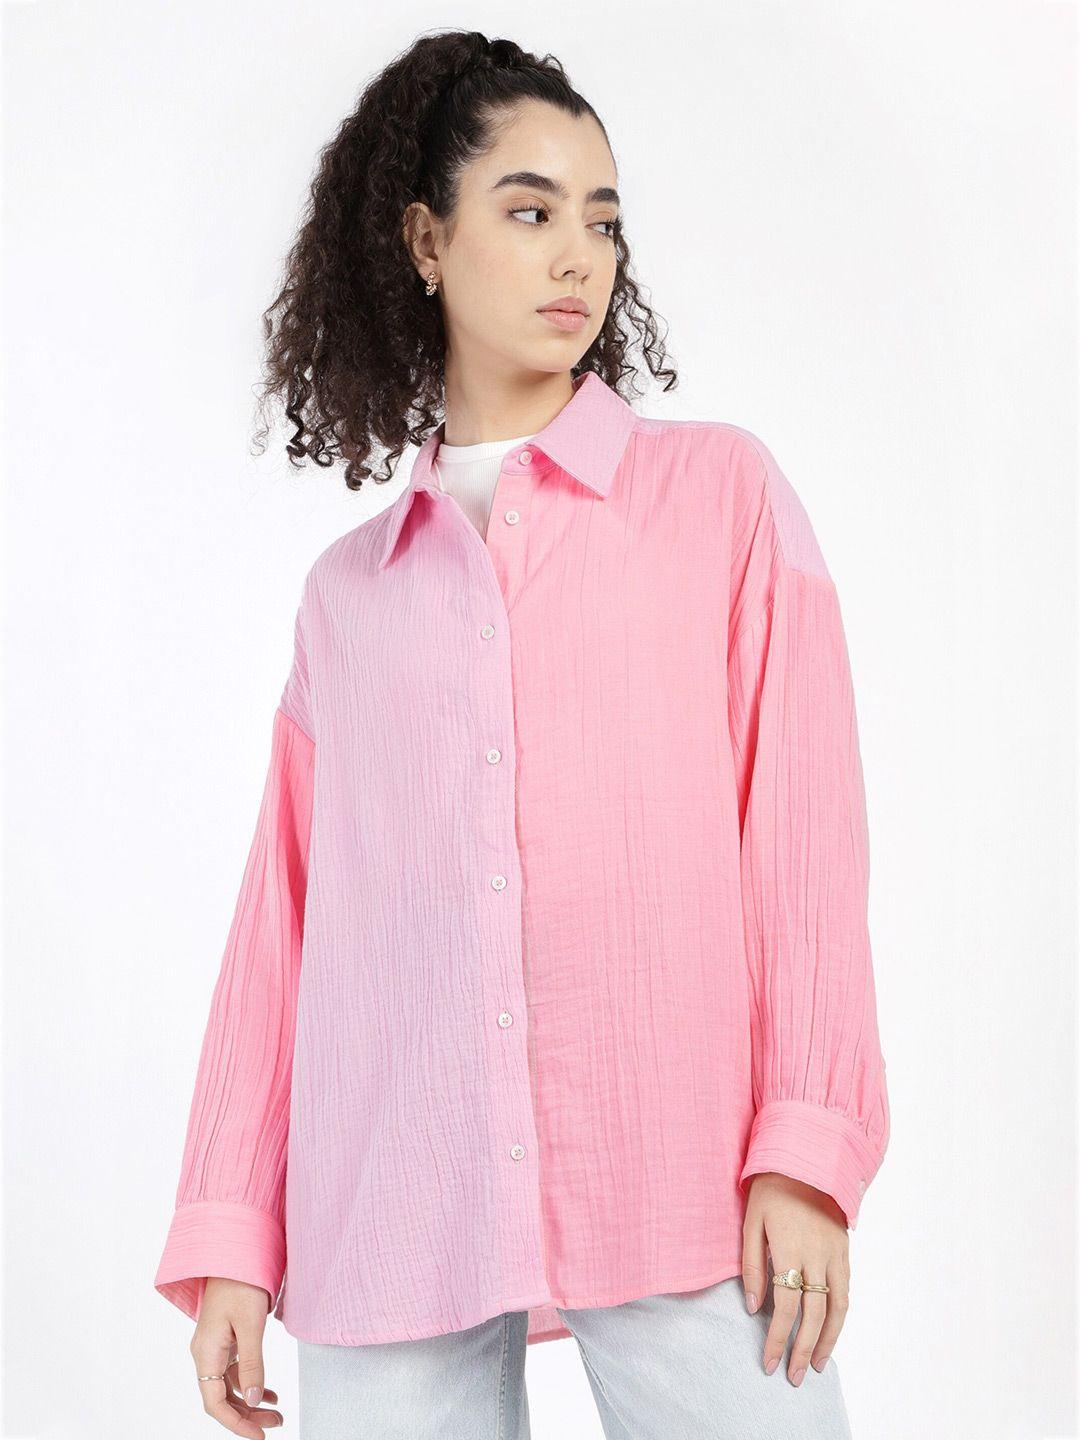 h&m pure cotton full sleeve pink shirt